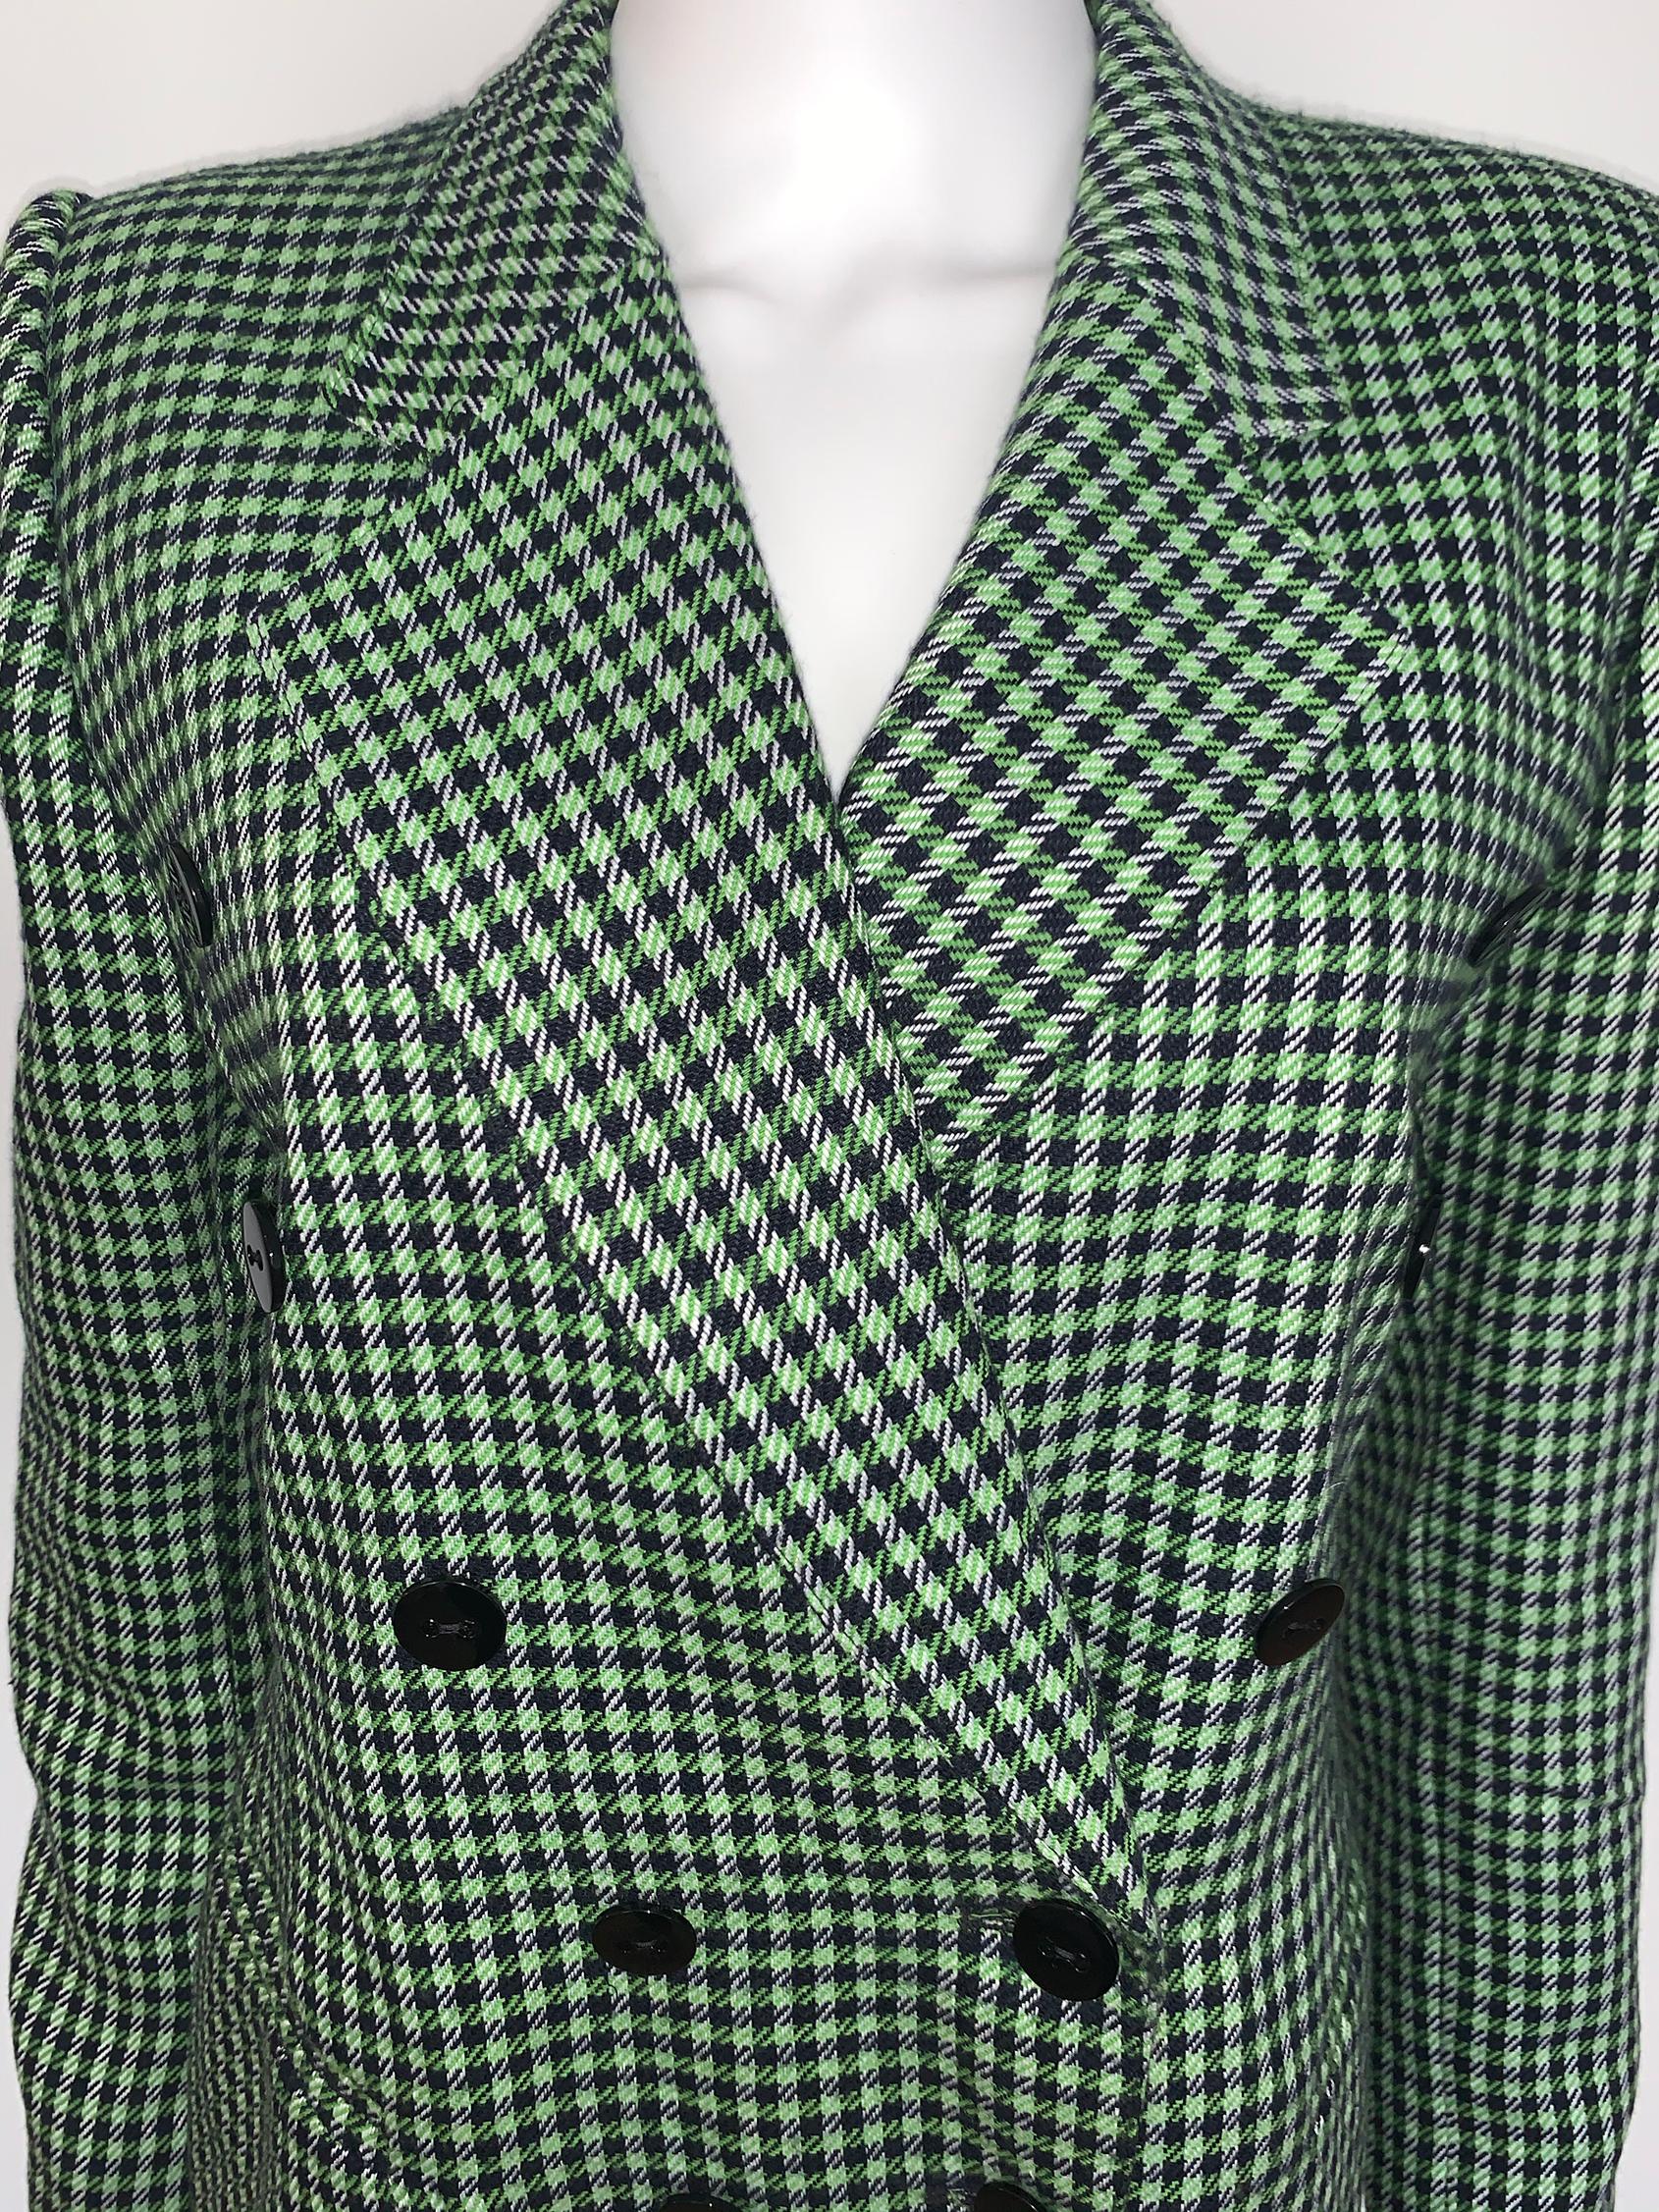 Vintage Escada Jacket circa 1990
- Checked print Green and dark navy 
- Double breasted jacket 
- Large collar 
- Straight fitting 
- Two pocket 
- Size 40/M 
- Perfect condition 
